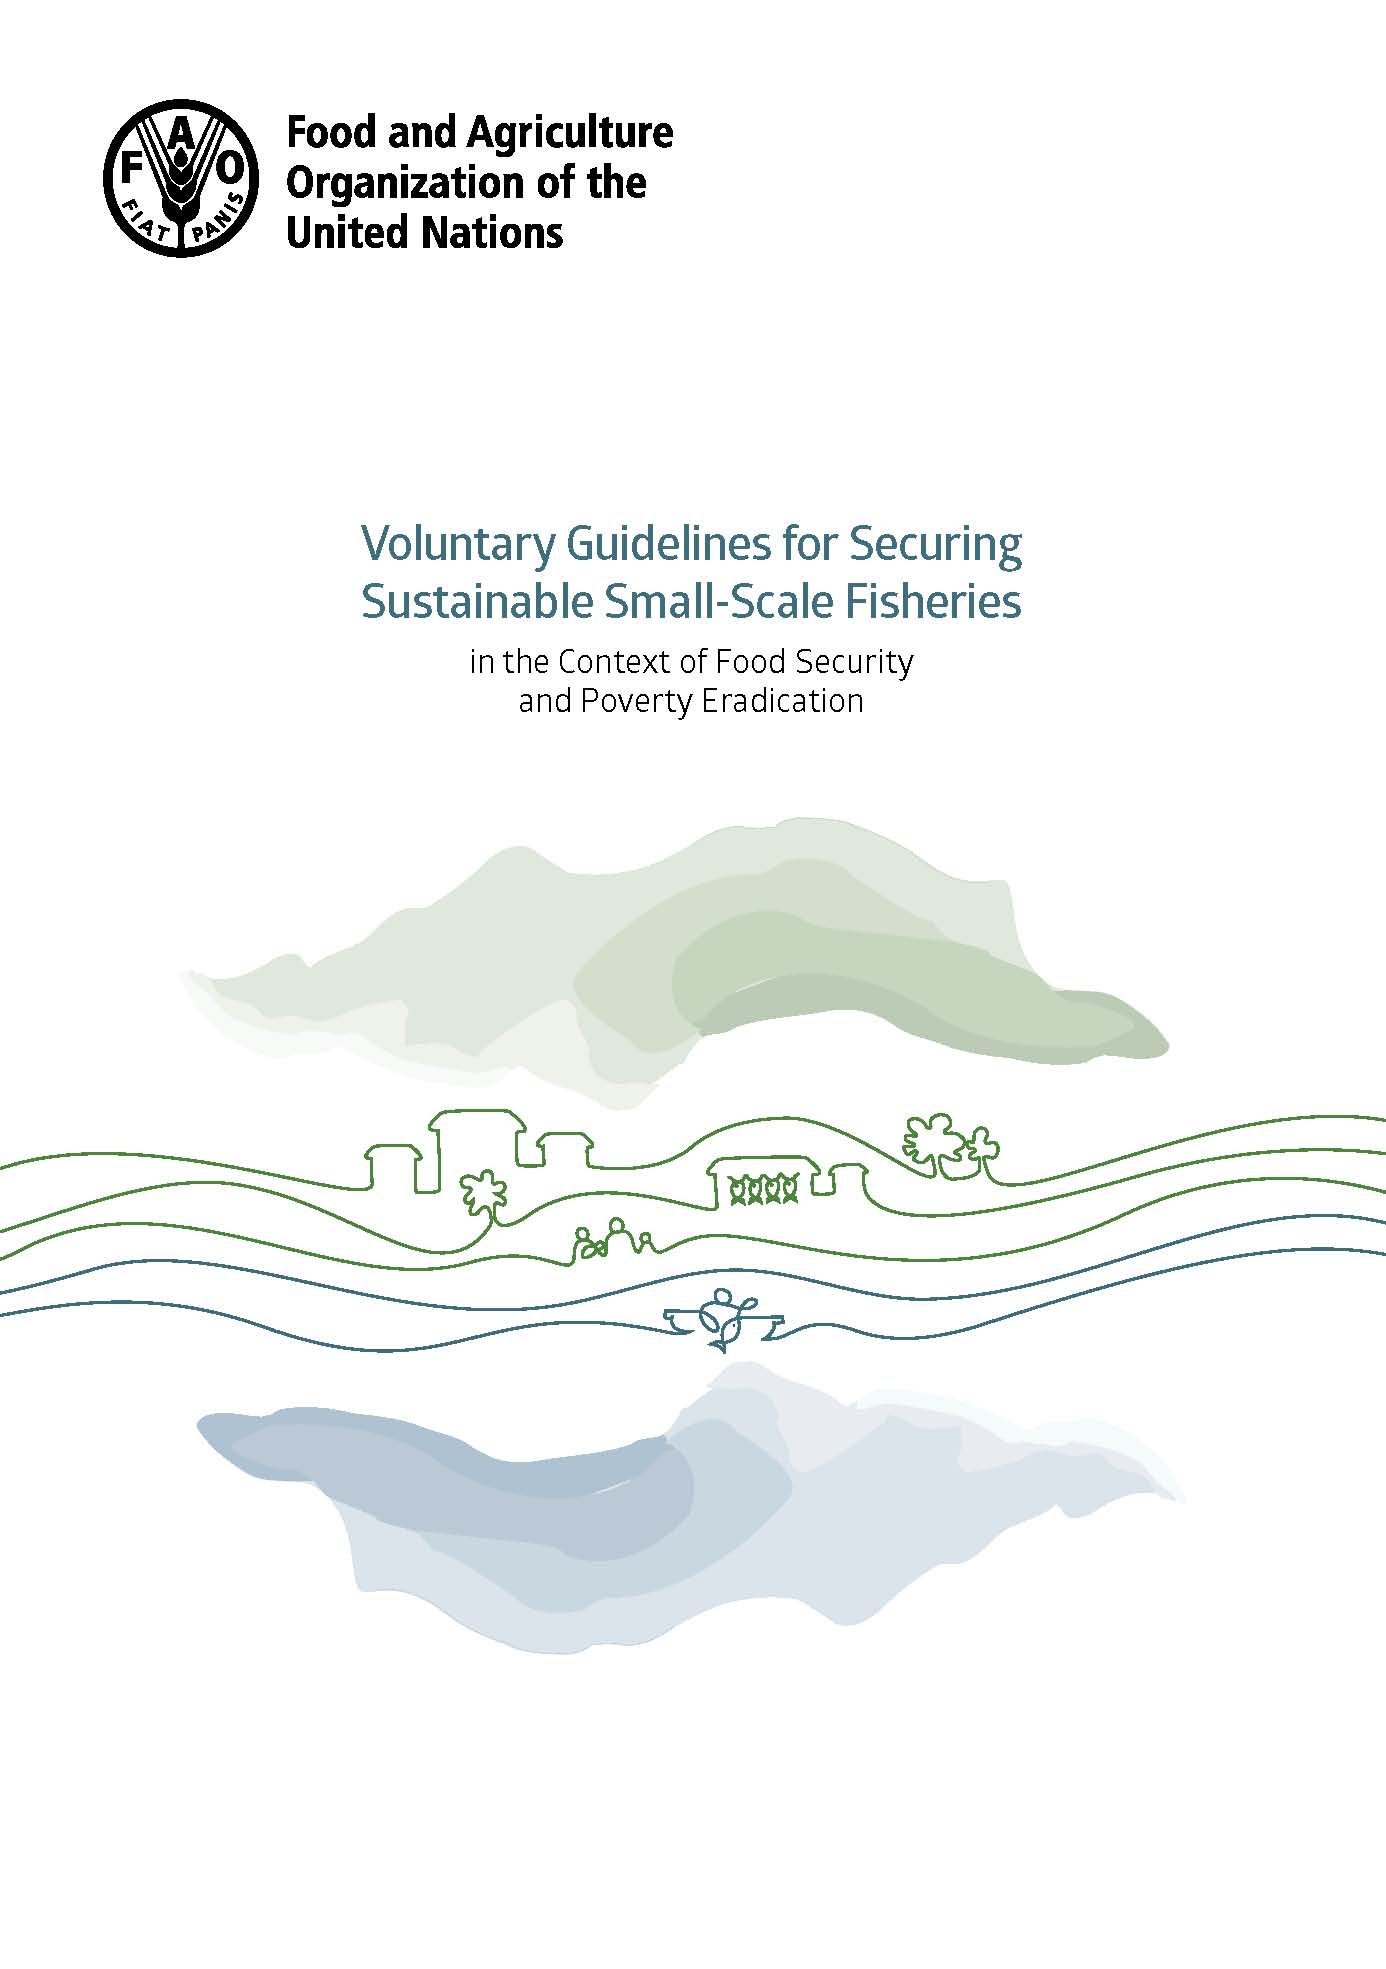 Voluntary Guidelines for Securing Sustainable Small-Scale Fisheries in the Context of Food Security and Poverty Eradication (SSF Guidelines) in English, Swahili, Burmese, Thai, Telugu, Hindi, Kannada, Odia, Tamil, Bengali and Marathi